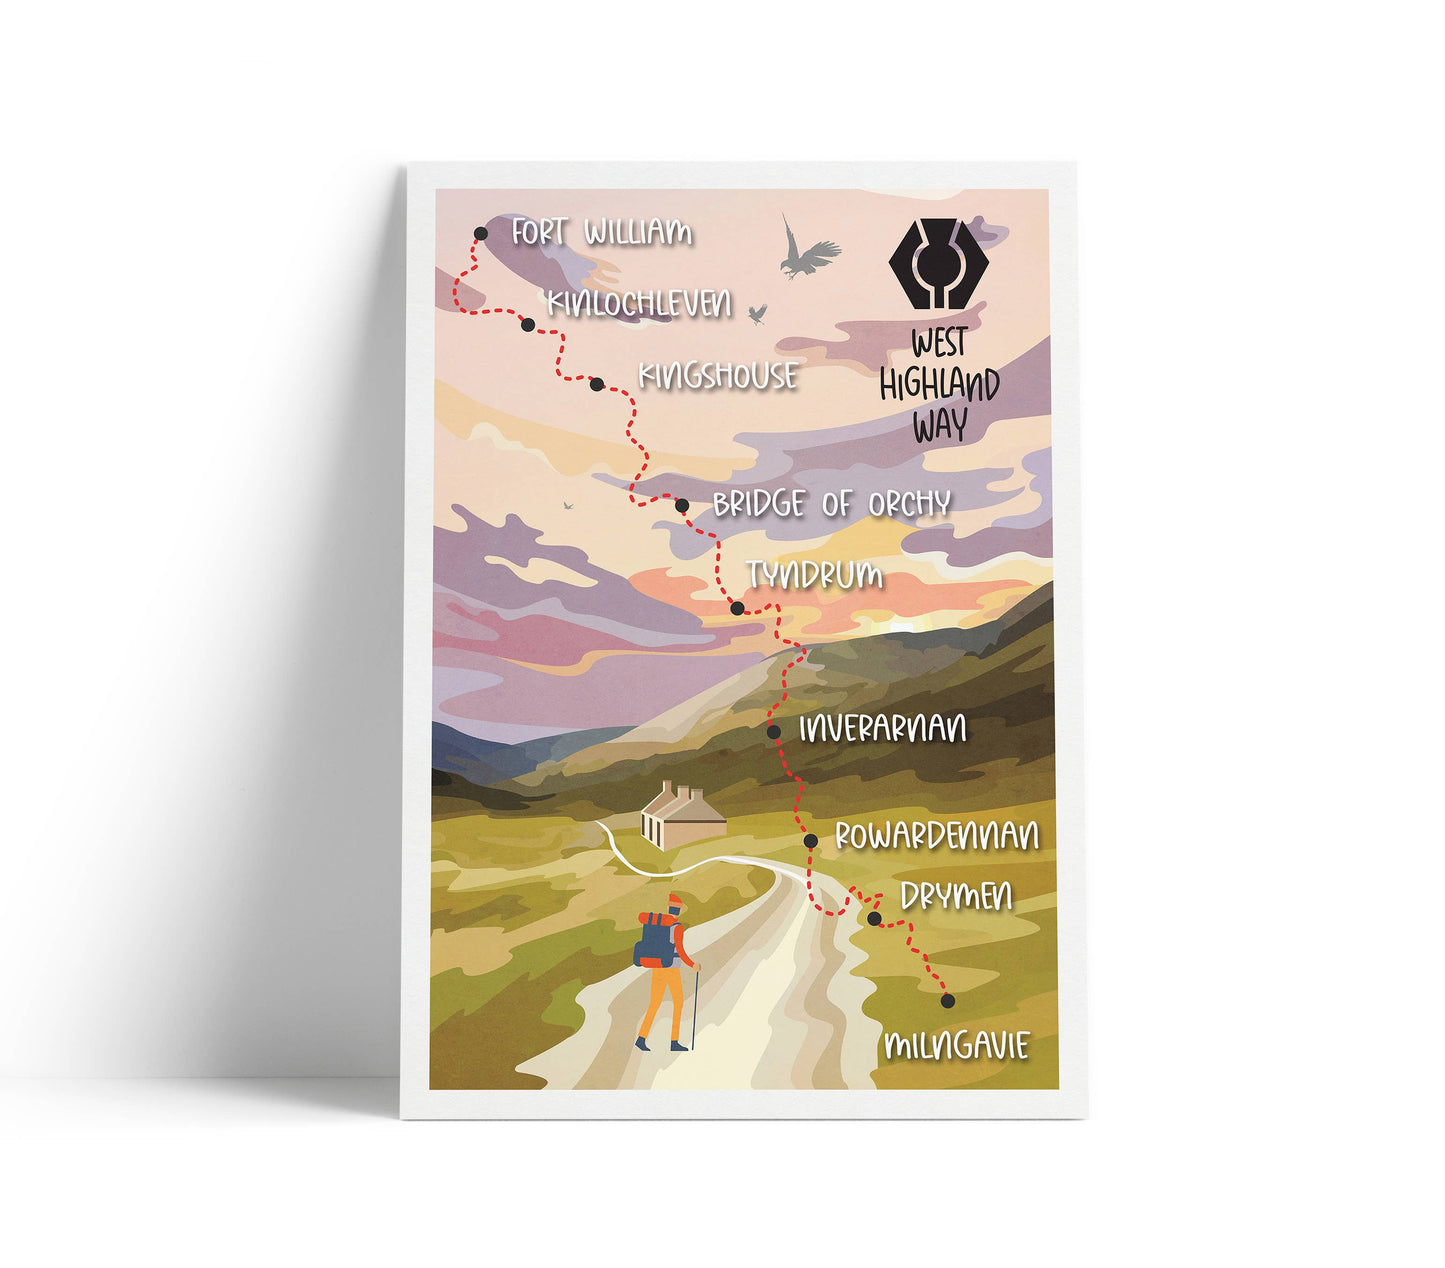 West Highland Way Route Map - Illustrated Trail Print